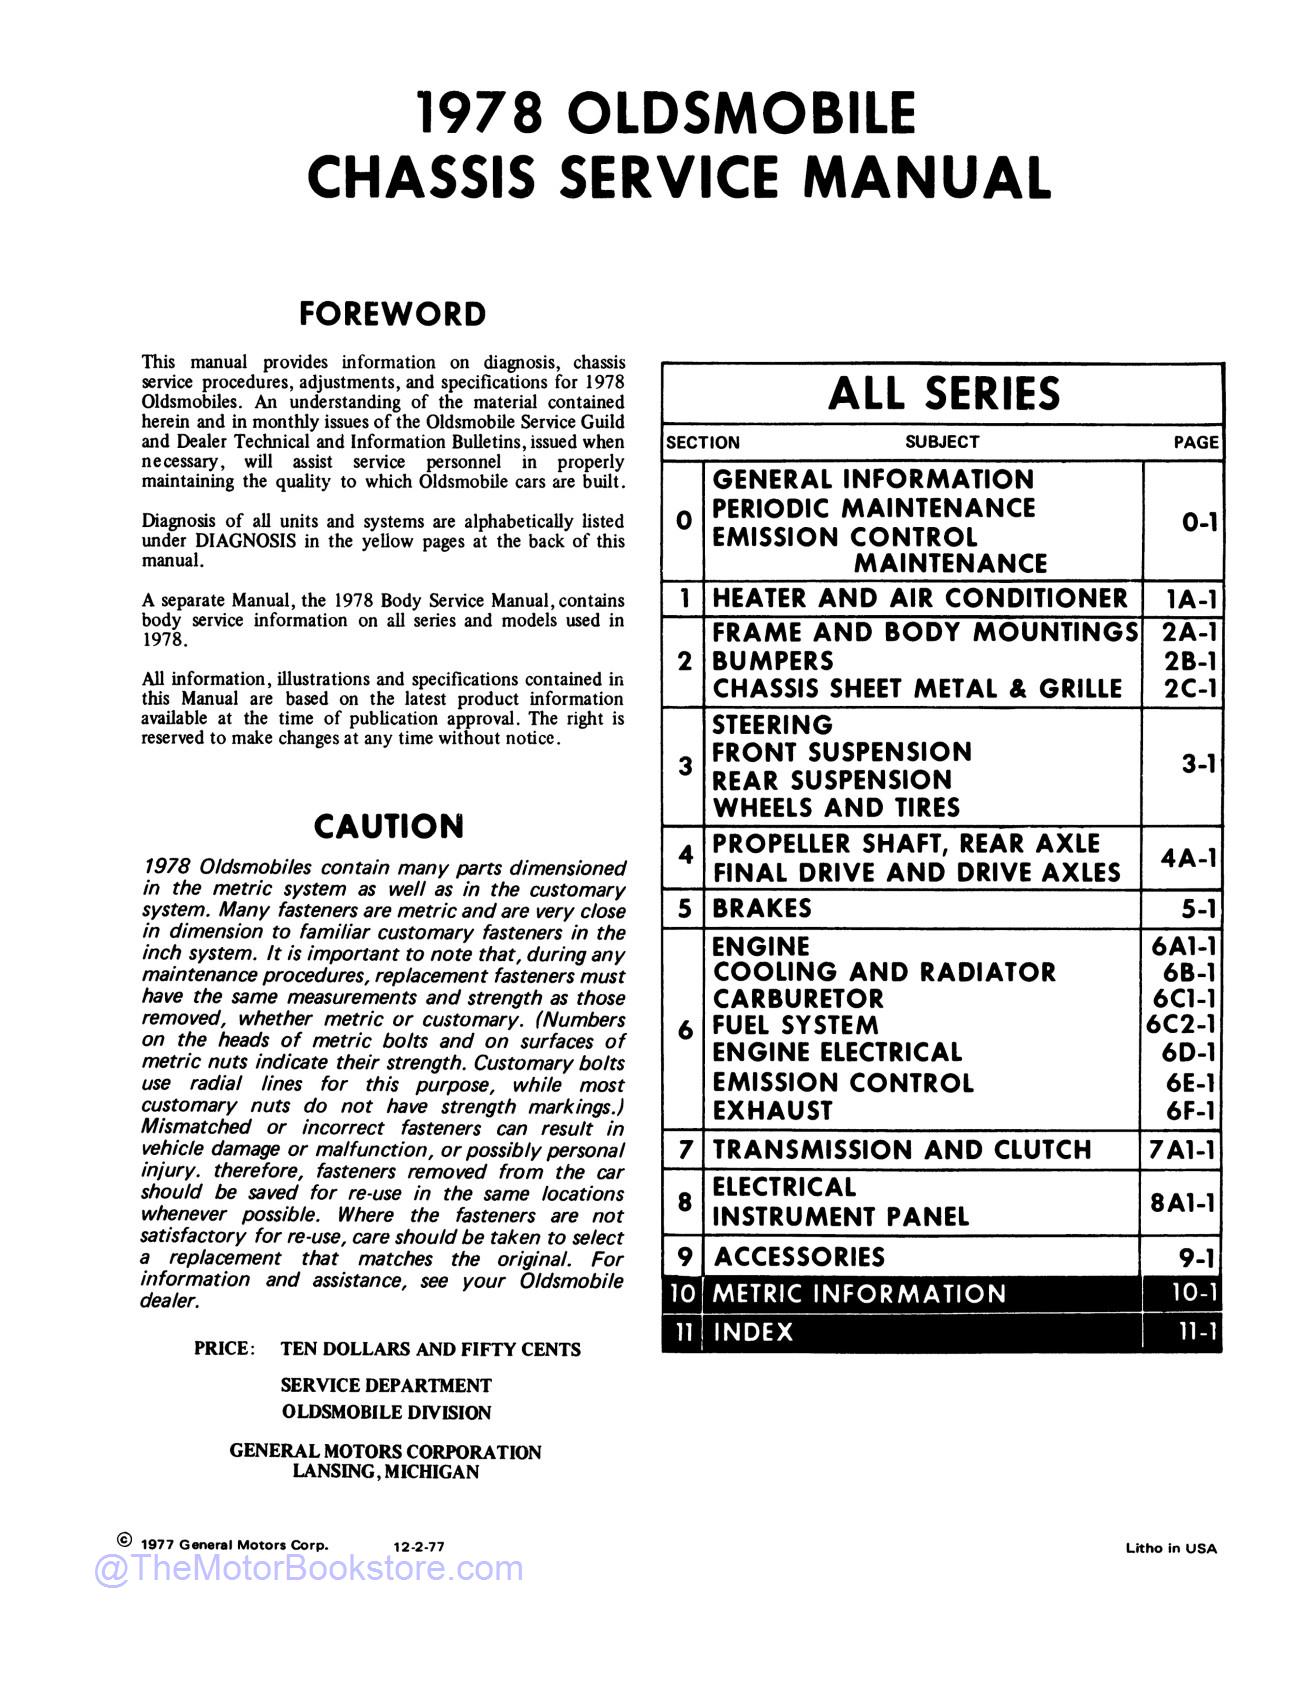 1978 Oldsmobile Service Repair Manual  - Table of Contents